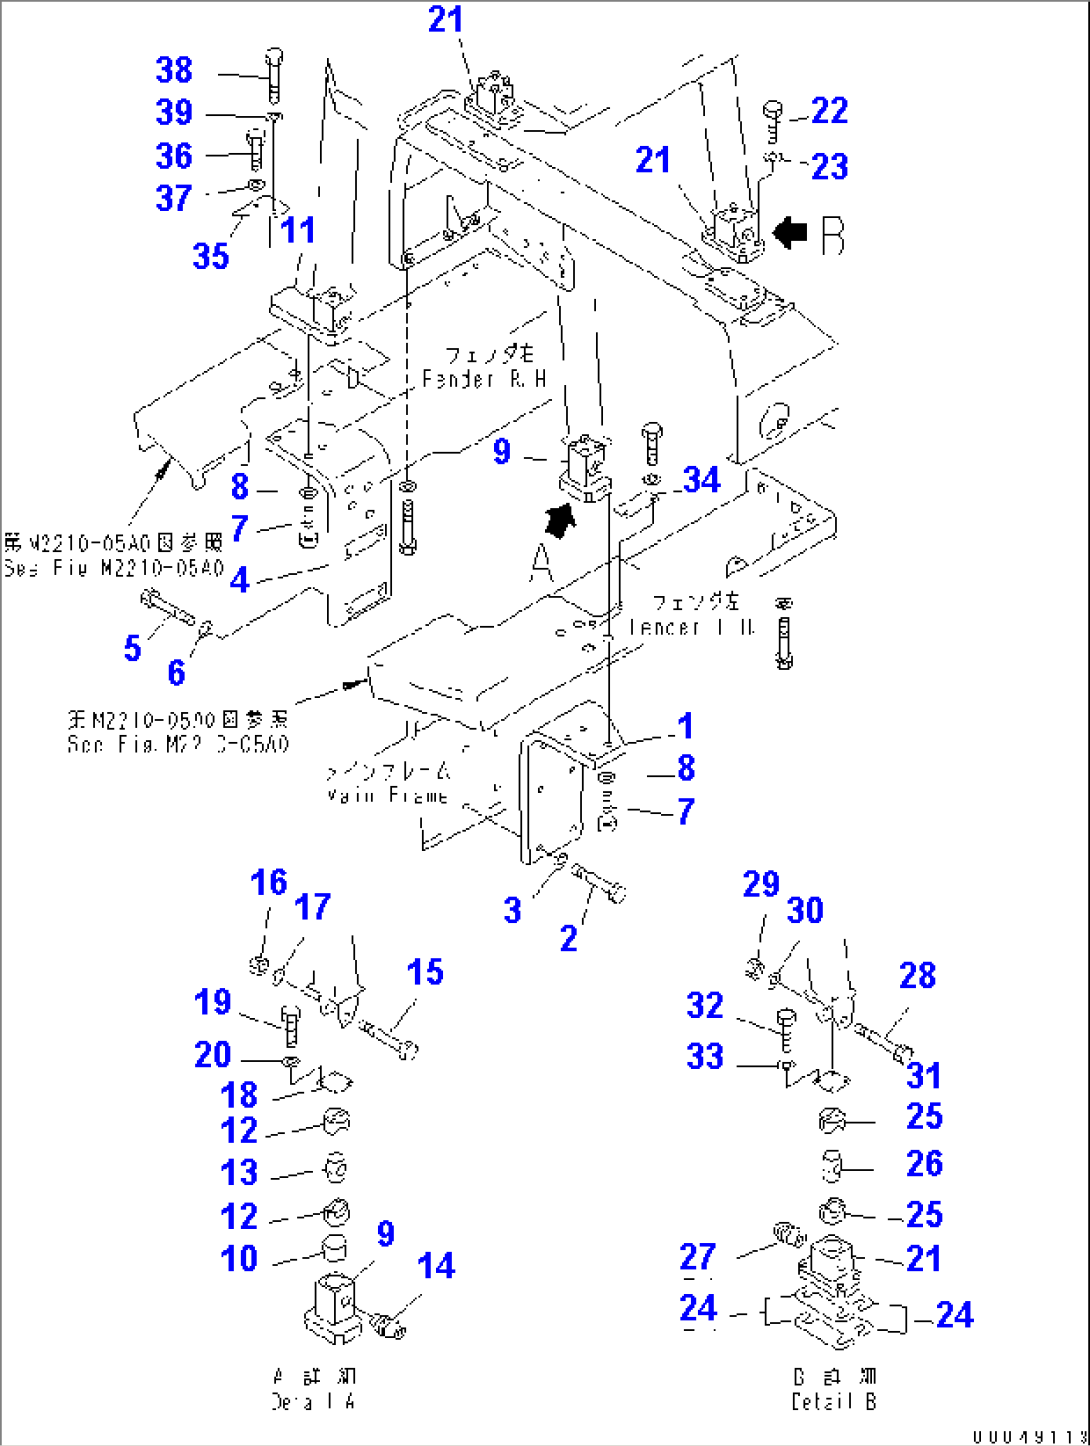 ROLL OVER PROTECTIVE STRUCTURE BRACKET